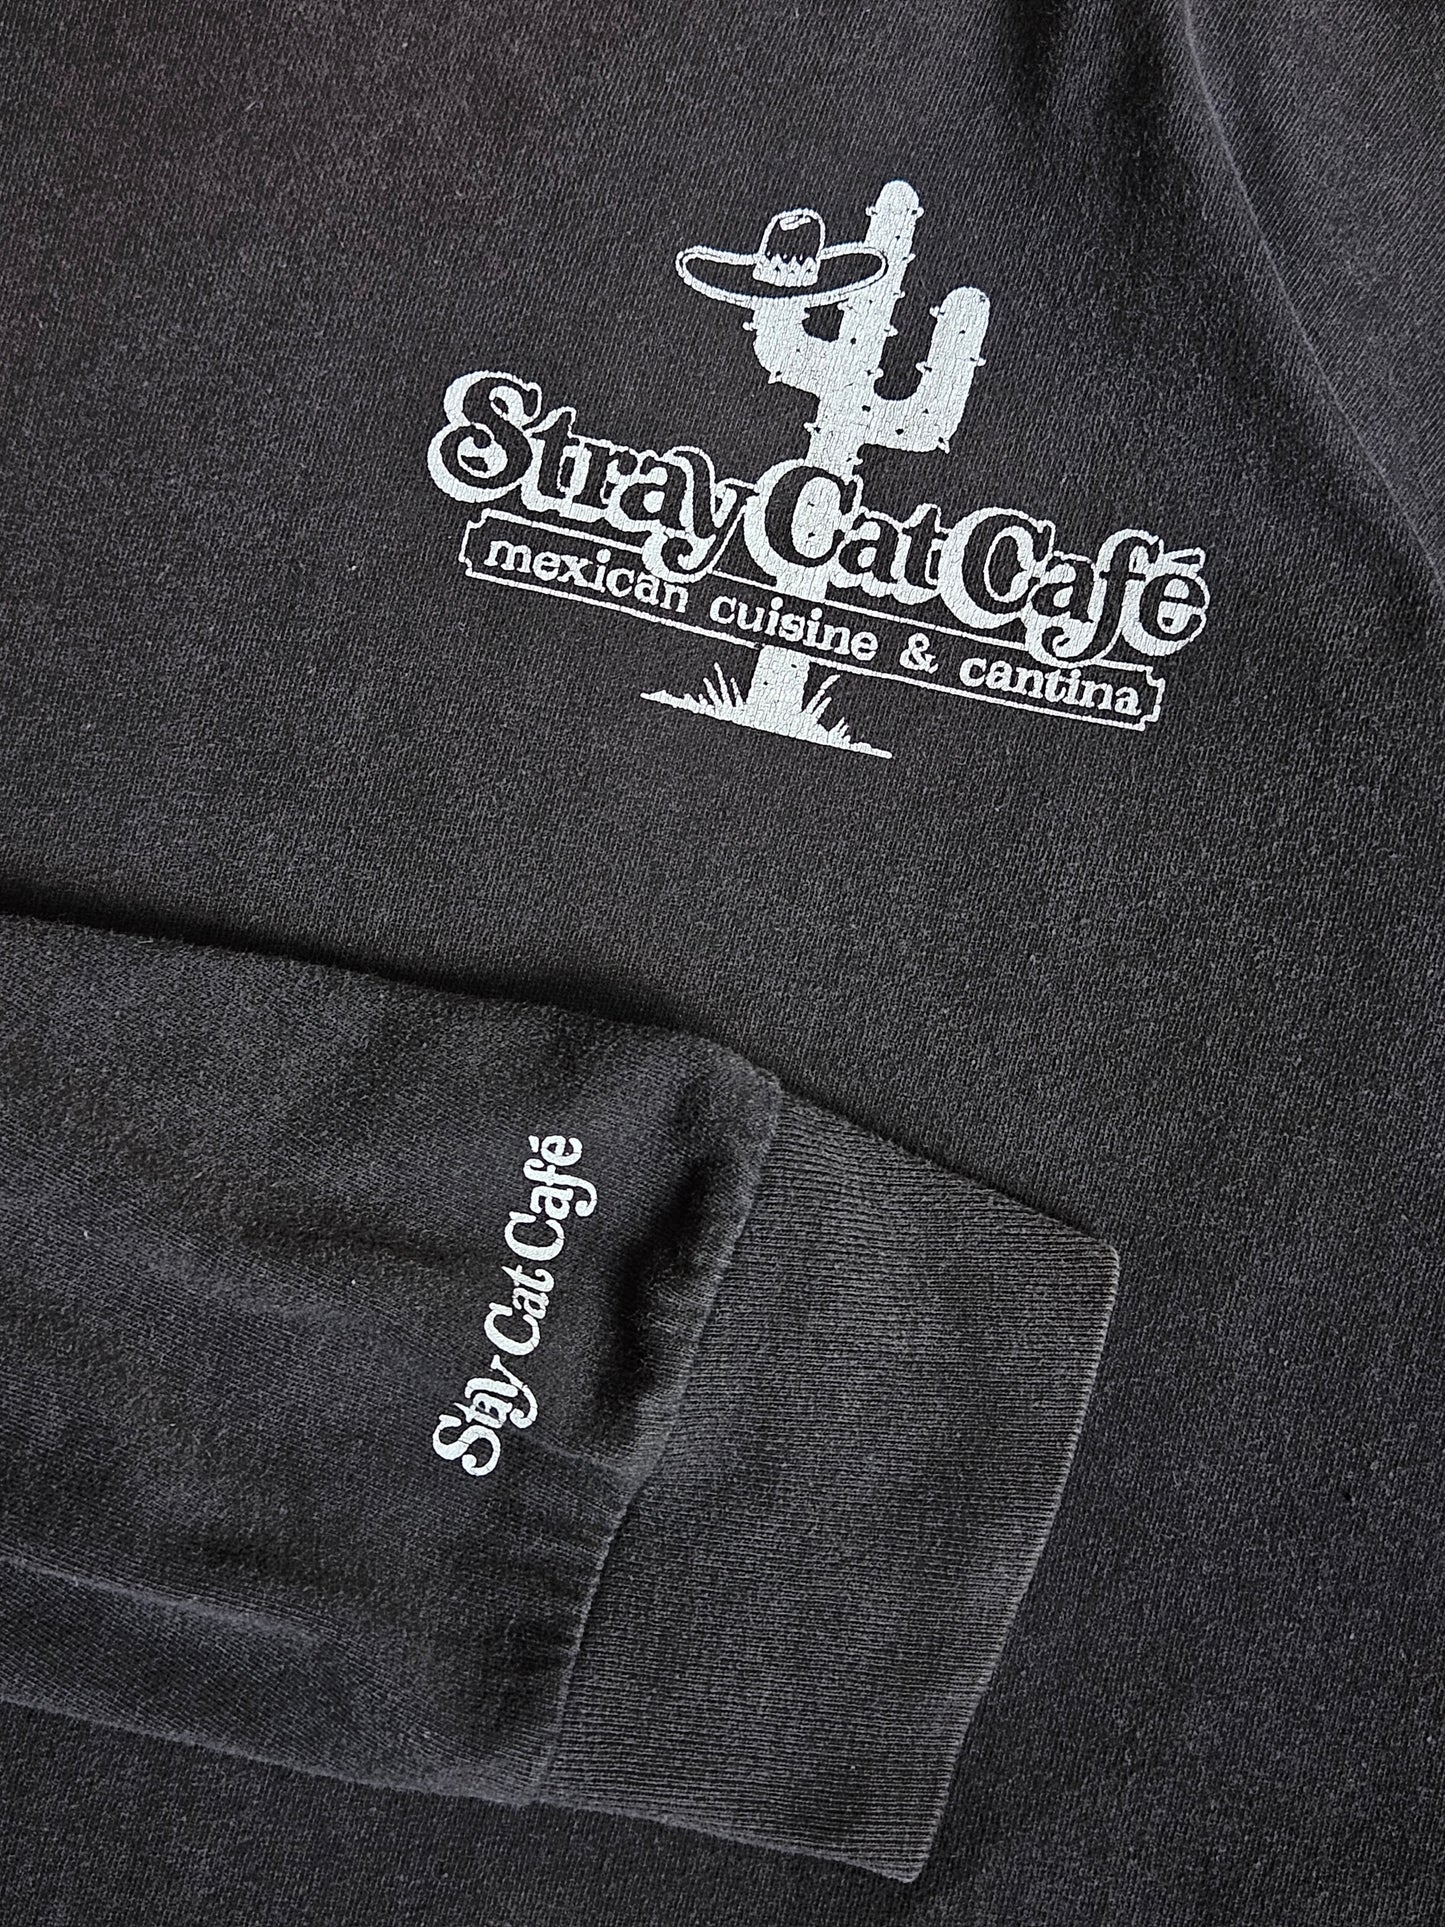 90s STRAY CAT CAFE MEXICAN CANTINA LONGSLEEVE [XL]